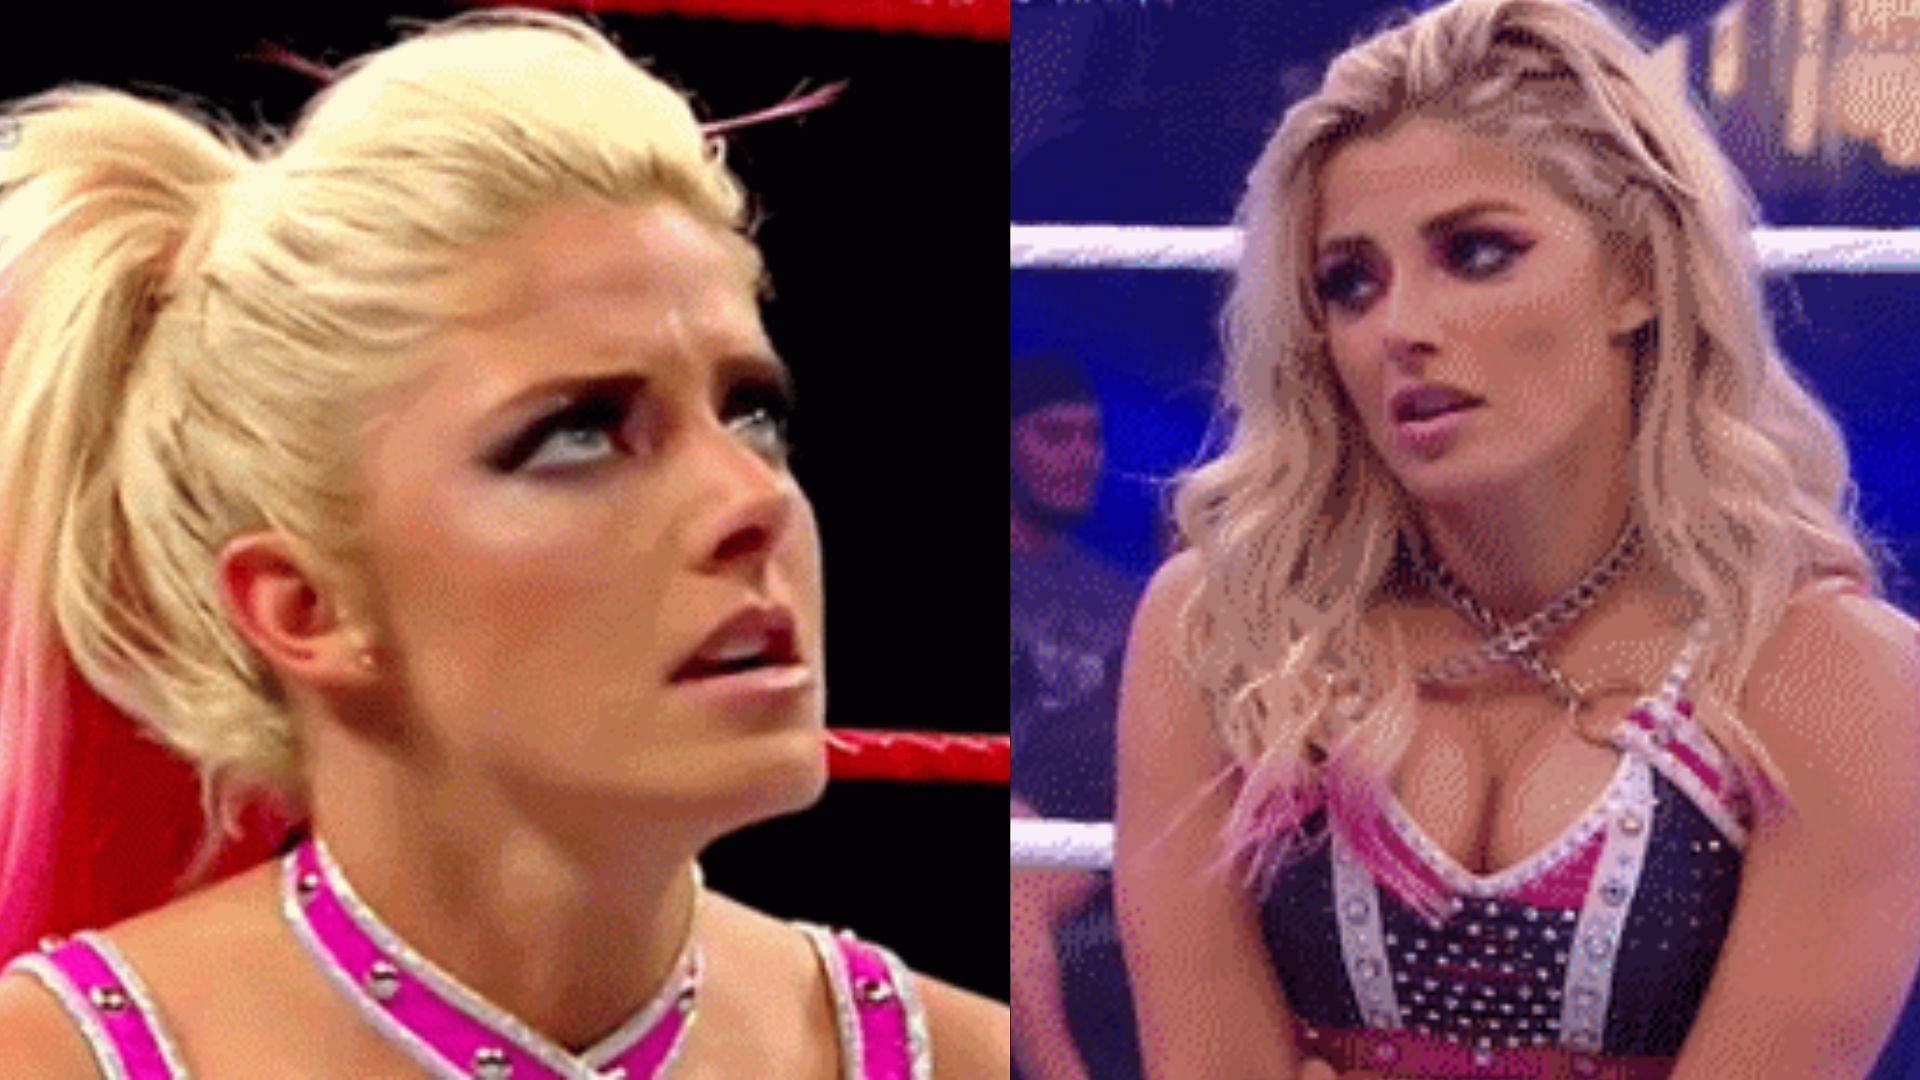 Alexa Bliss has been gone for a long time now